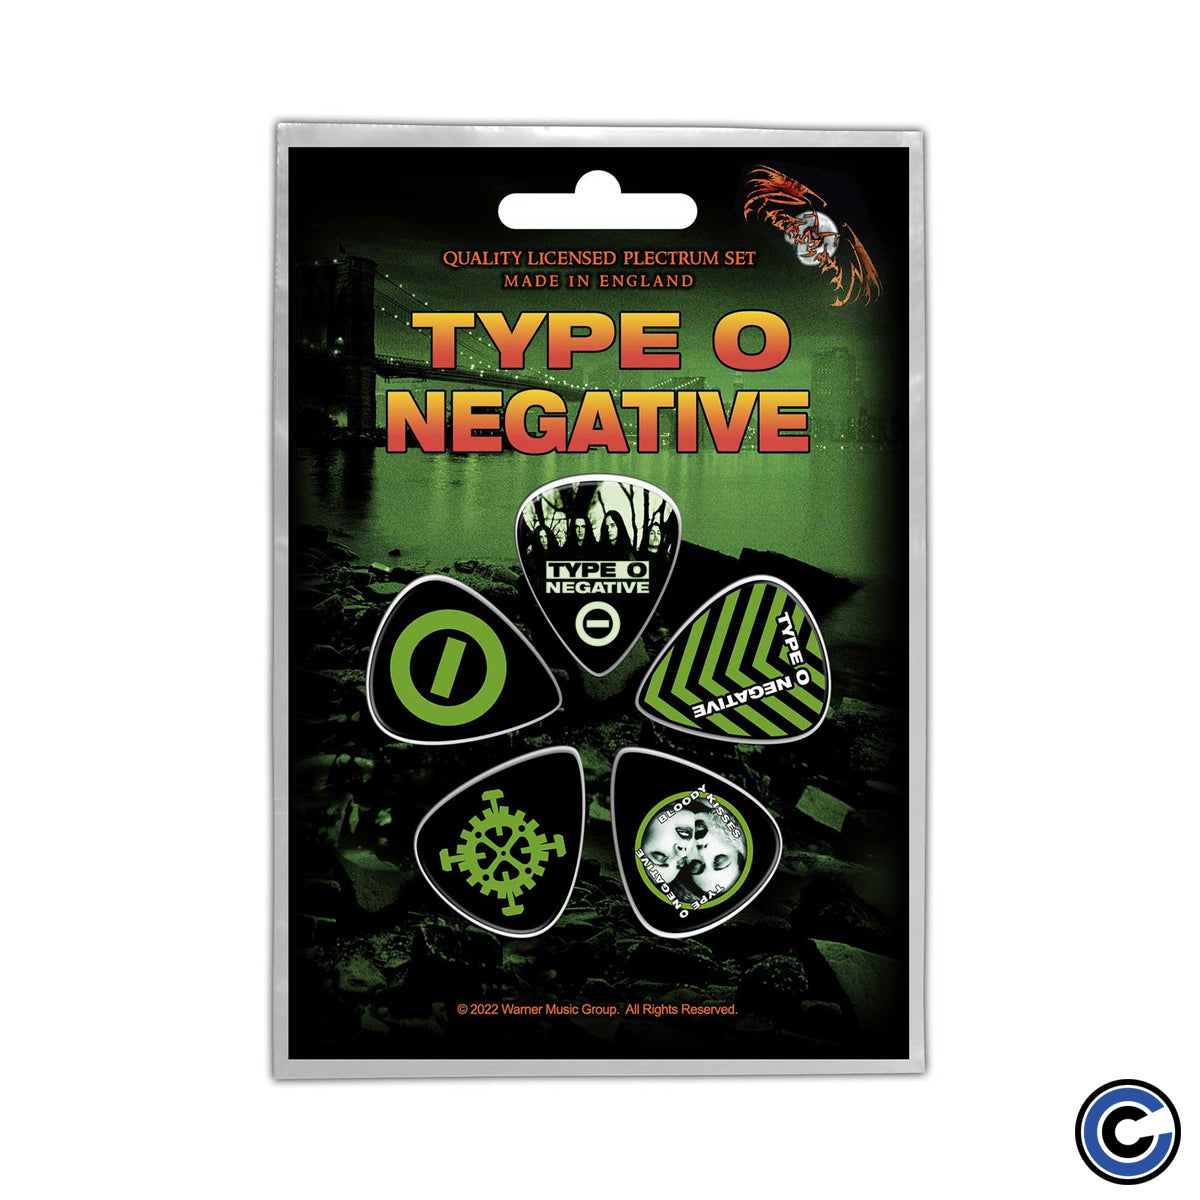 Type O Negative "World Coming Down" Plectrum Pack